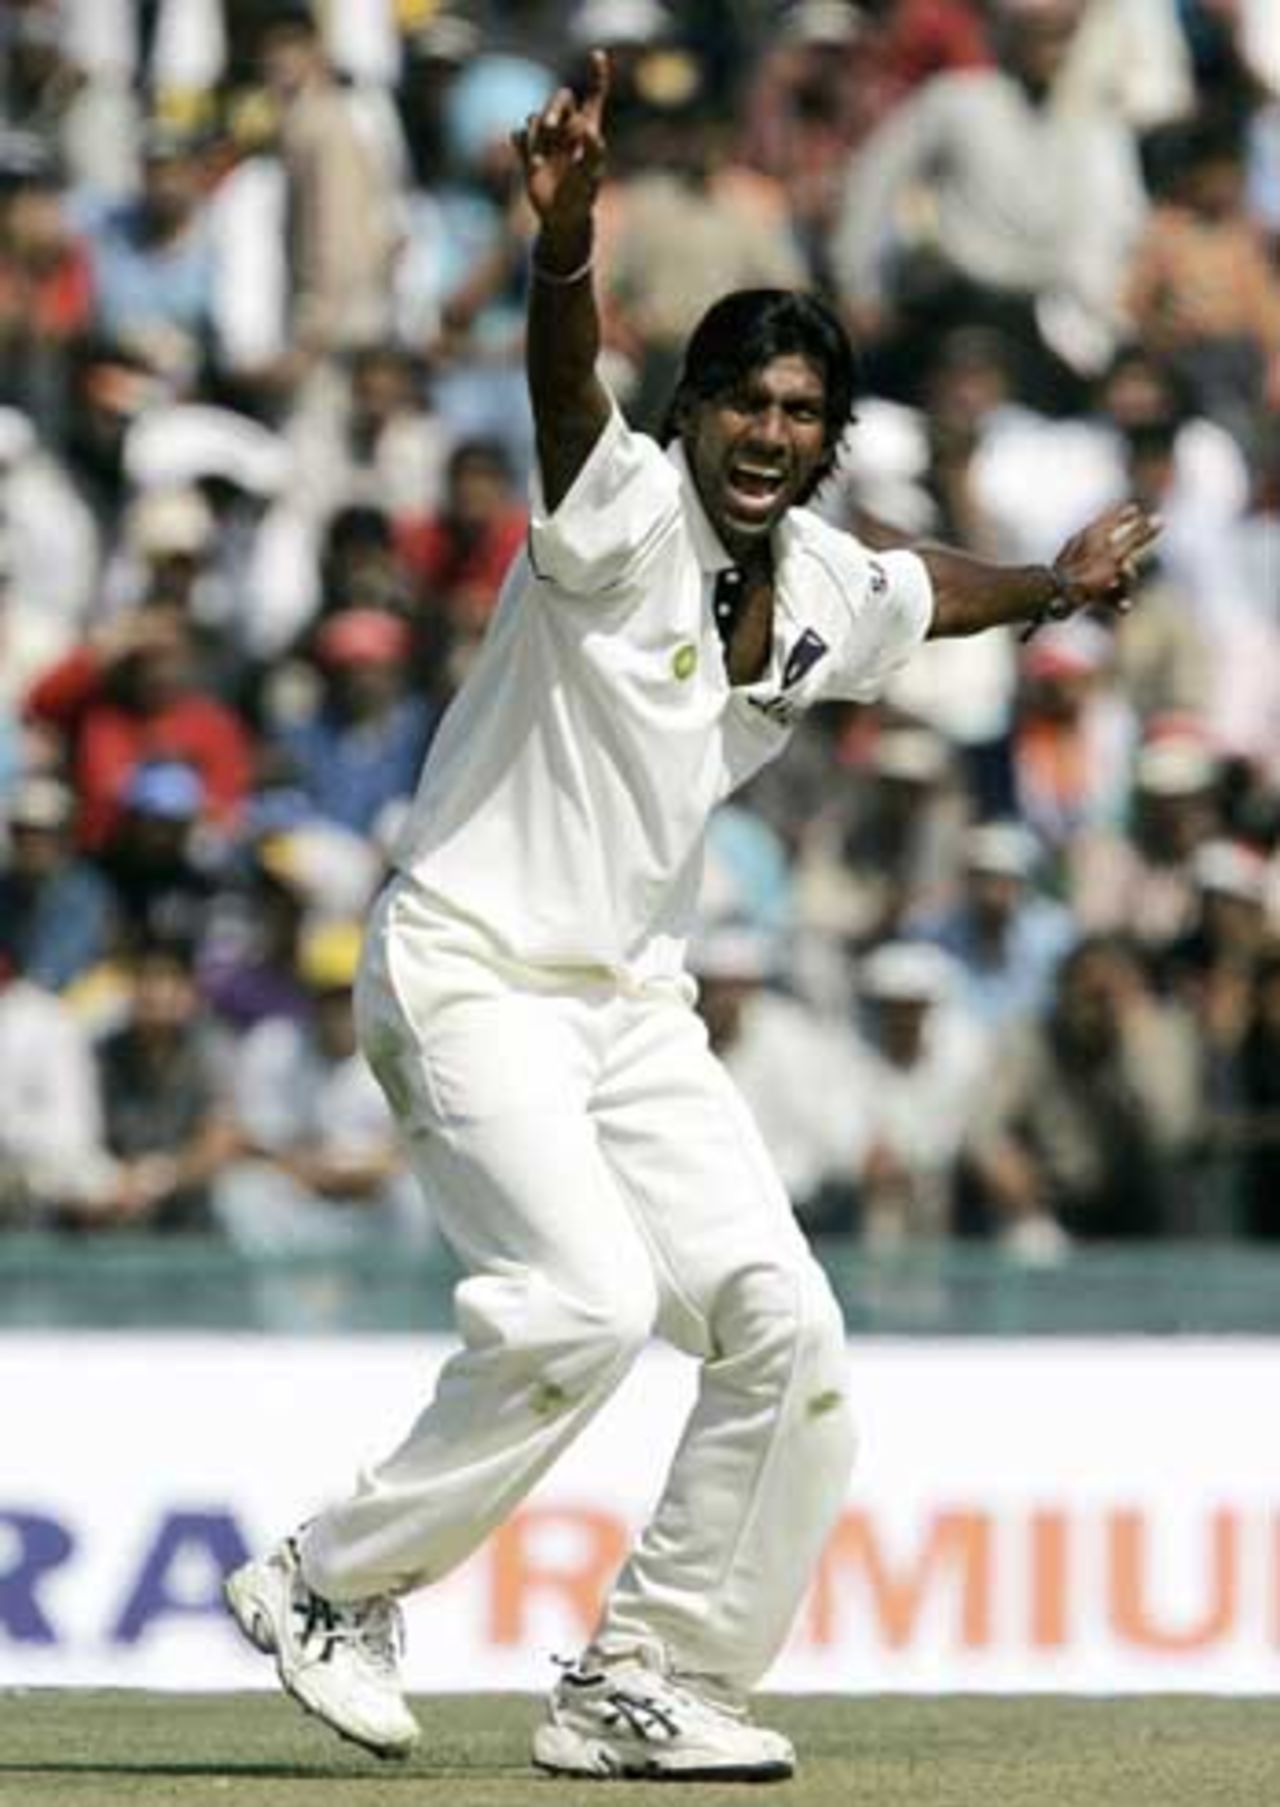 Lakshmipathy Balaji seals the innings, trapping Naved-ul-Hasan lbw, India v Pakistan, 1st Test, Mohali, March 8, 2005